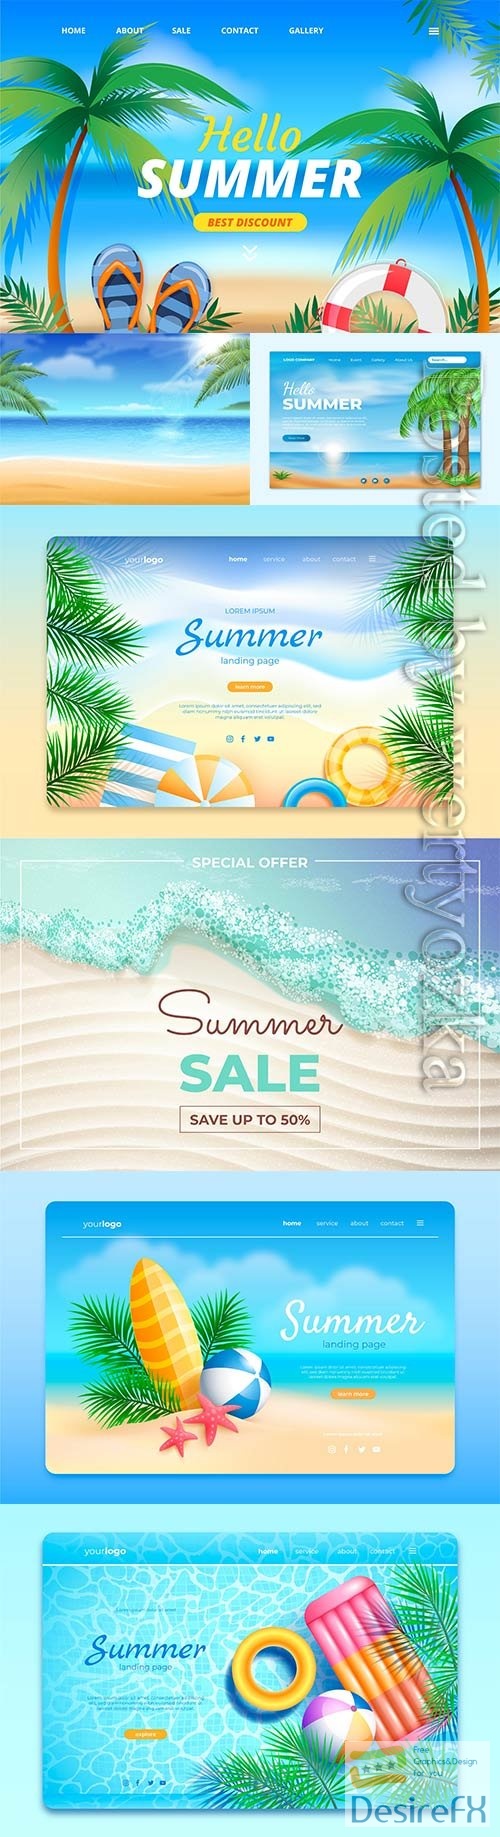 Realistic summer landing page vector template